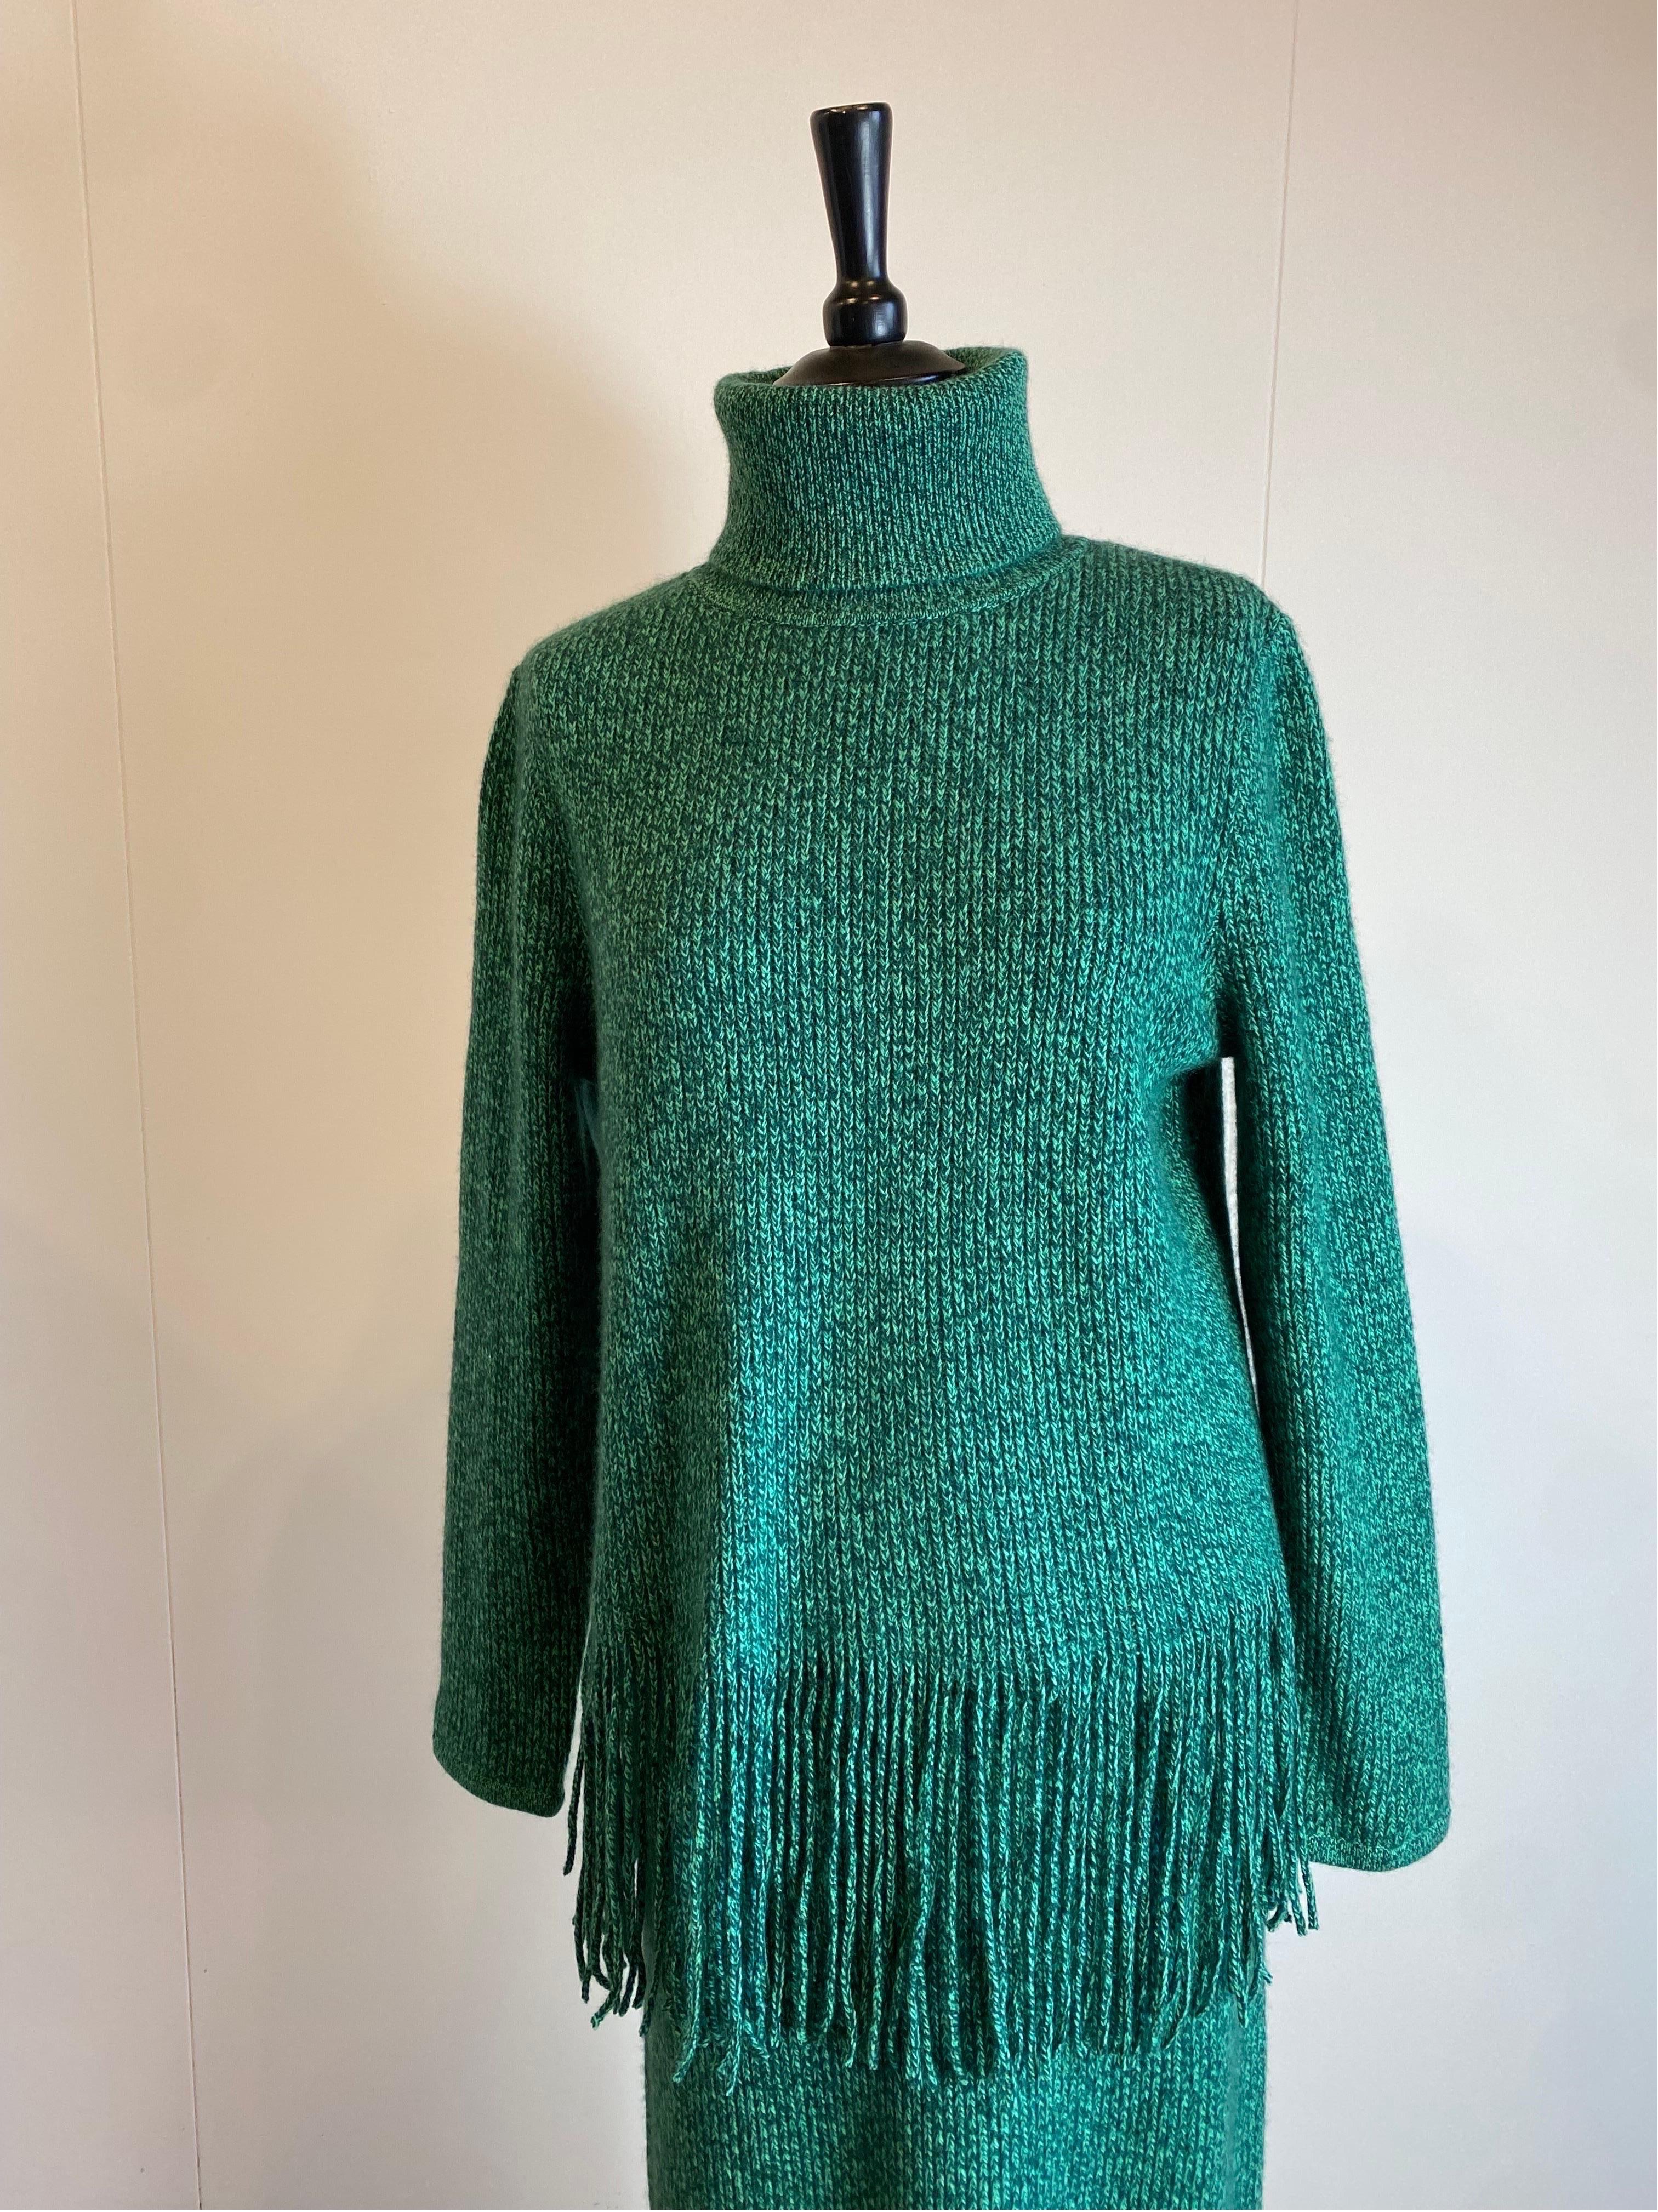 Zimmermann cashmere green co ords sweater and skirt Set For Sale 1